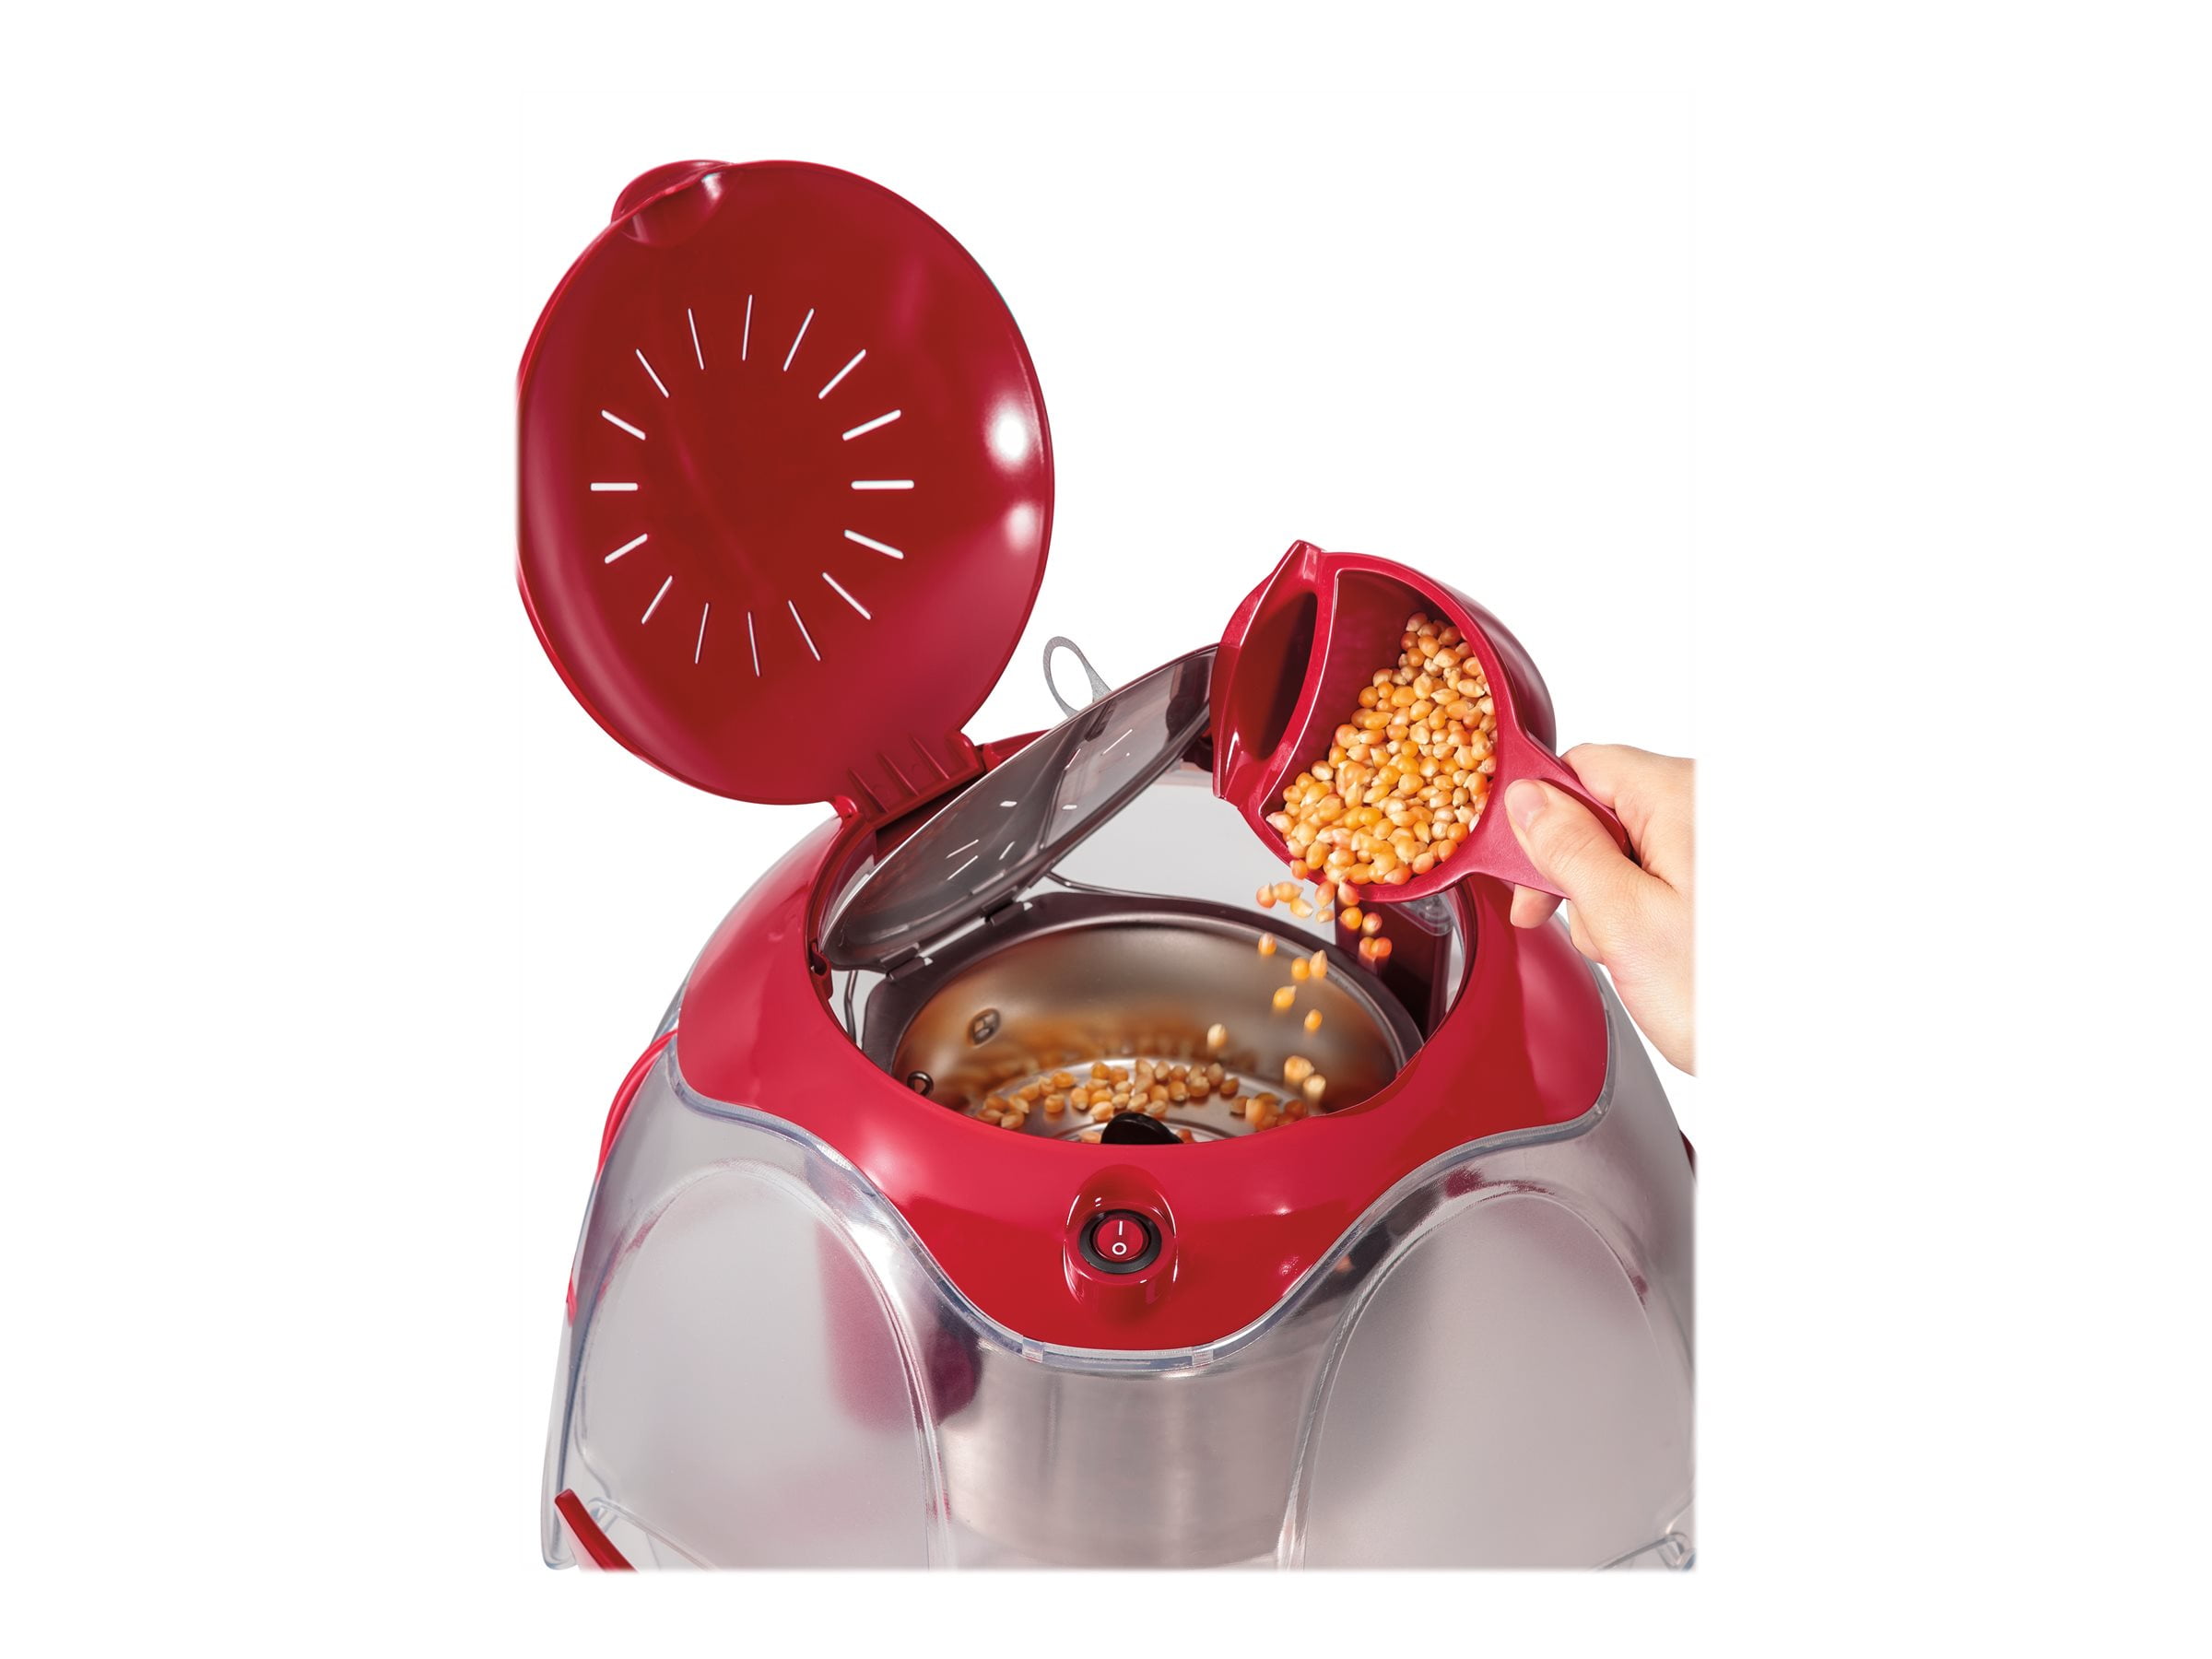 Hamilton Beach 24 Cup Hot Oil Popcorn Popper With Lid Doubles as